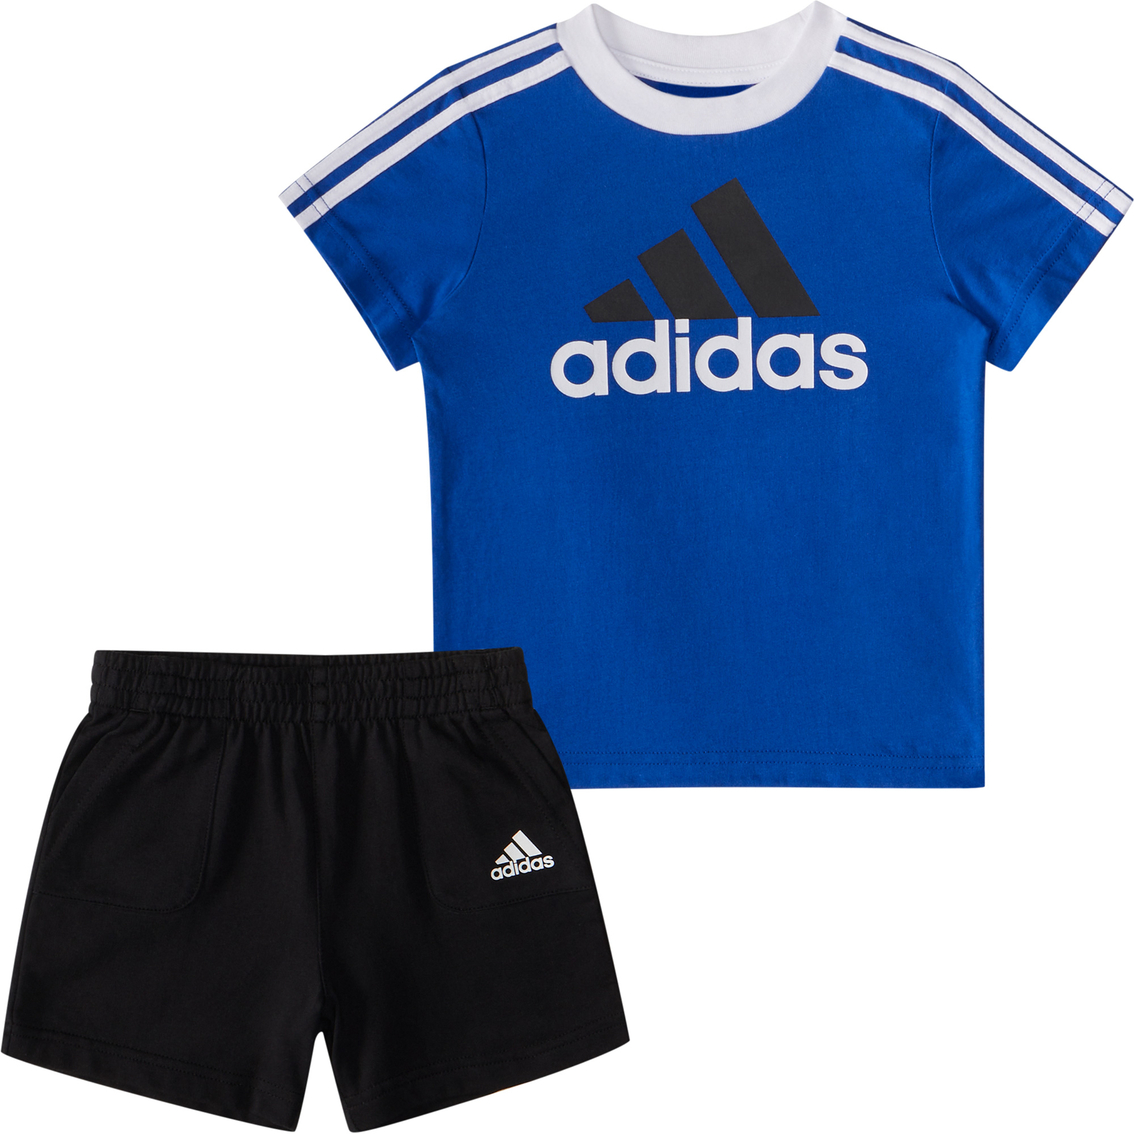 Adidas Infant Boys French Terry Top And Shorts 2 Pc. Set ...